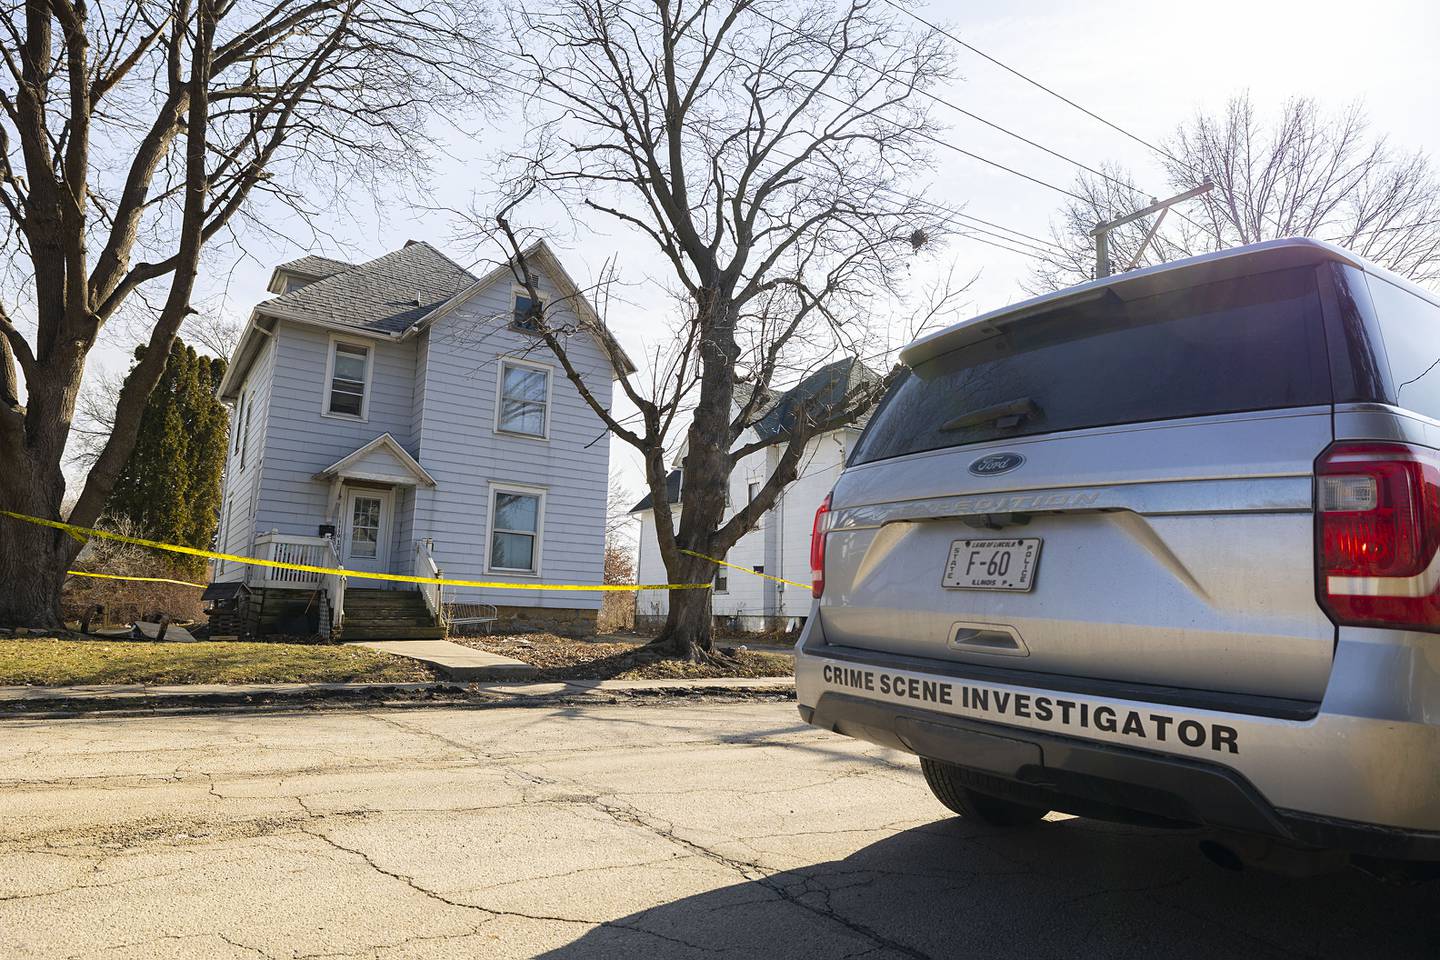 Investigators work at the scene Monday, Feb. 20, 2023 of a Sunday night shooting in the 1100 block of 4th Ave. in Sterling. One victim was pronounced dead with four taken into custody.